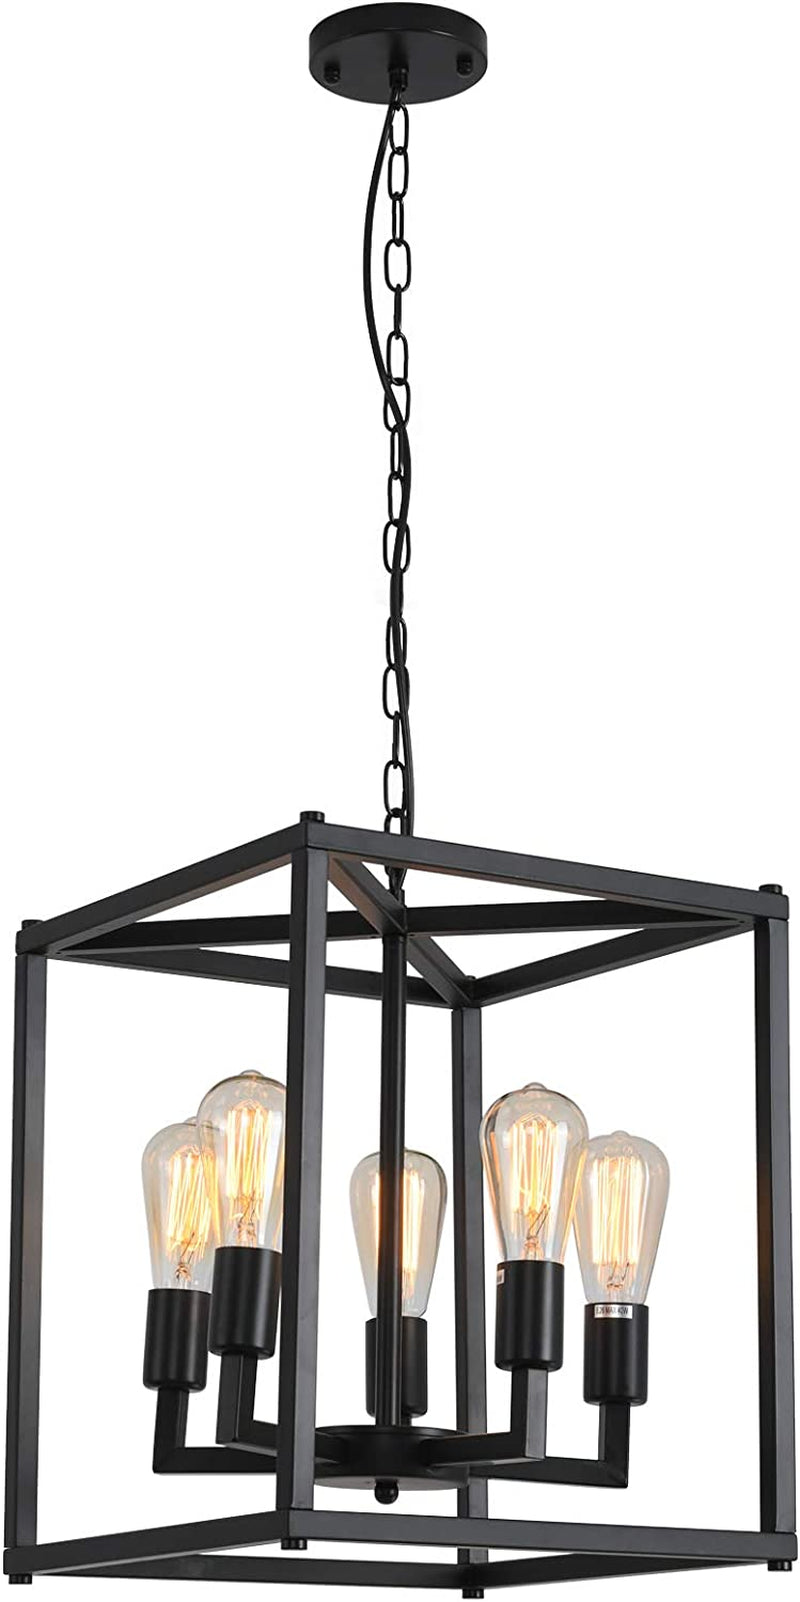 Farmhouse Chandelier Black Iron Chandelier 8 Lights Farmhouse Ceiling Light Fixtures Hanging for Dining Room Industrial Rustic Pendant Lights Living Room Bedroom Home & Garden > Lighting > Lighting Fixtures > Chandeliers Walnut Tree Black Style C Black-5 lights 